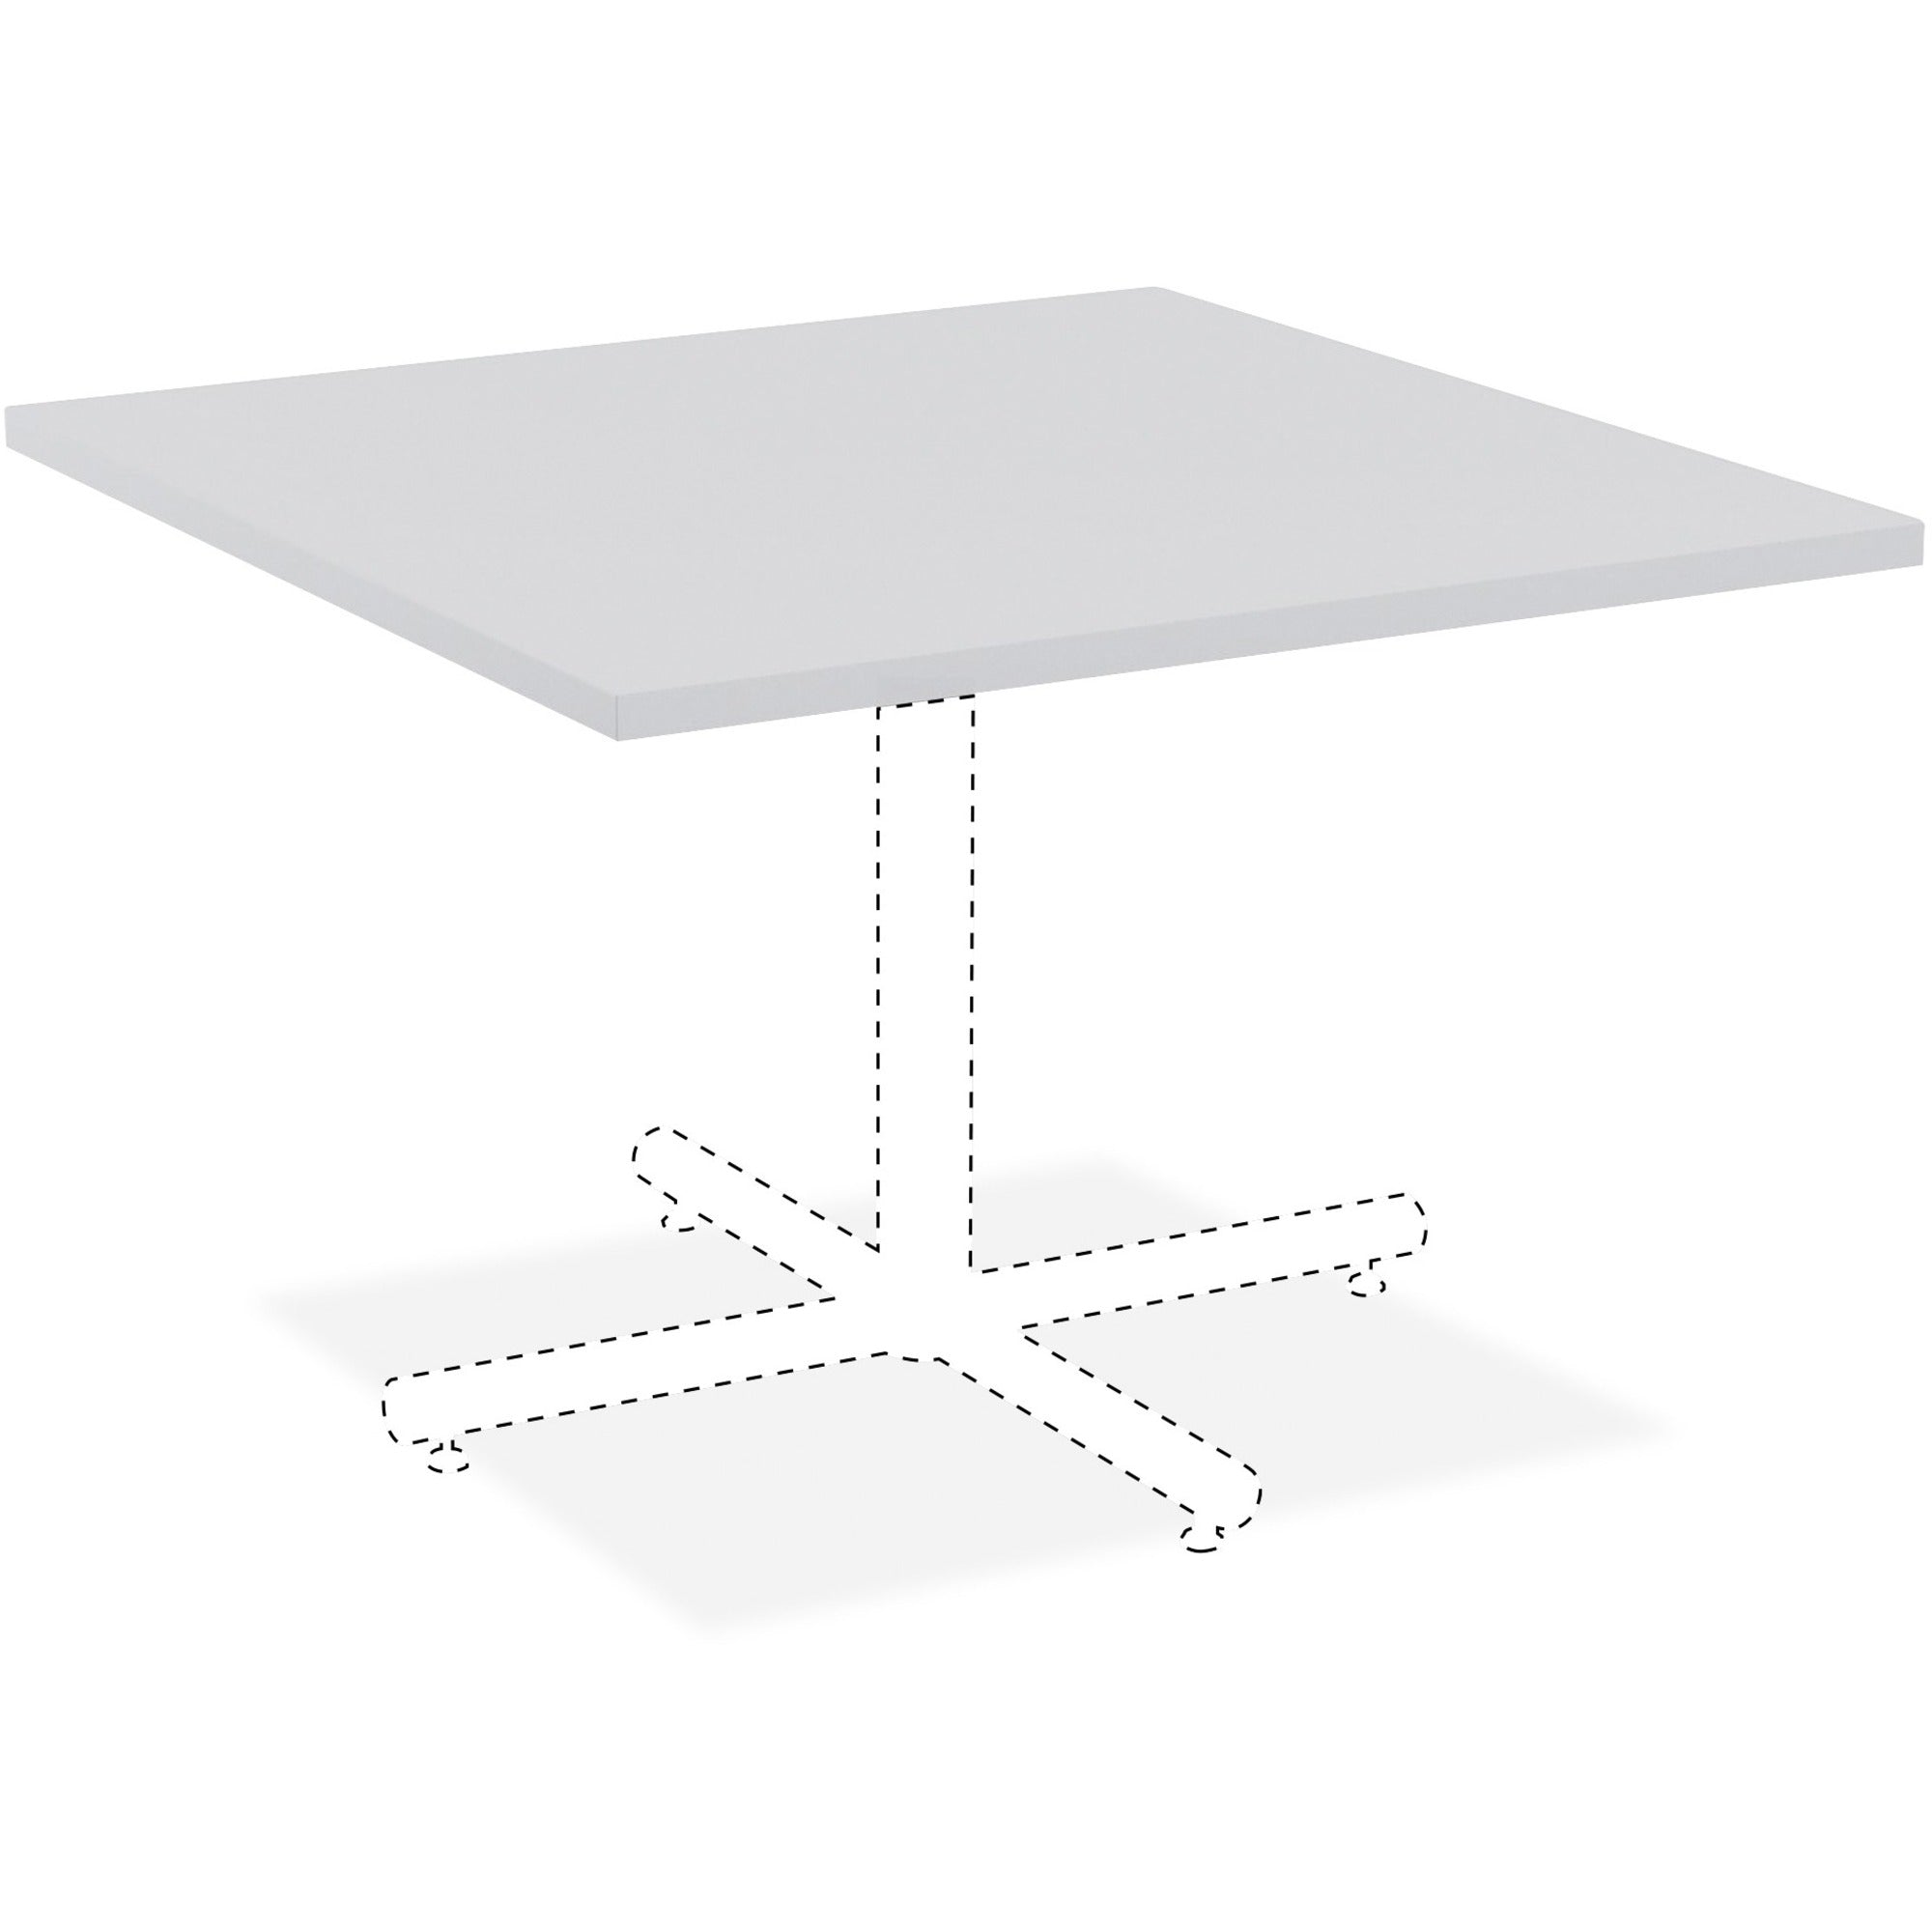 Lorell Hospitality Collection Tabletop - For - Table TopSquare Top - 42" Table Top Length x 42" Table Top Width x 1" Table Top Thickness - Assembly Required - High Pressure Laminate (HPL), Light Gray - 1 Each - 